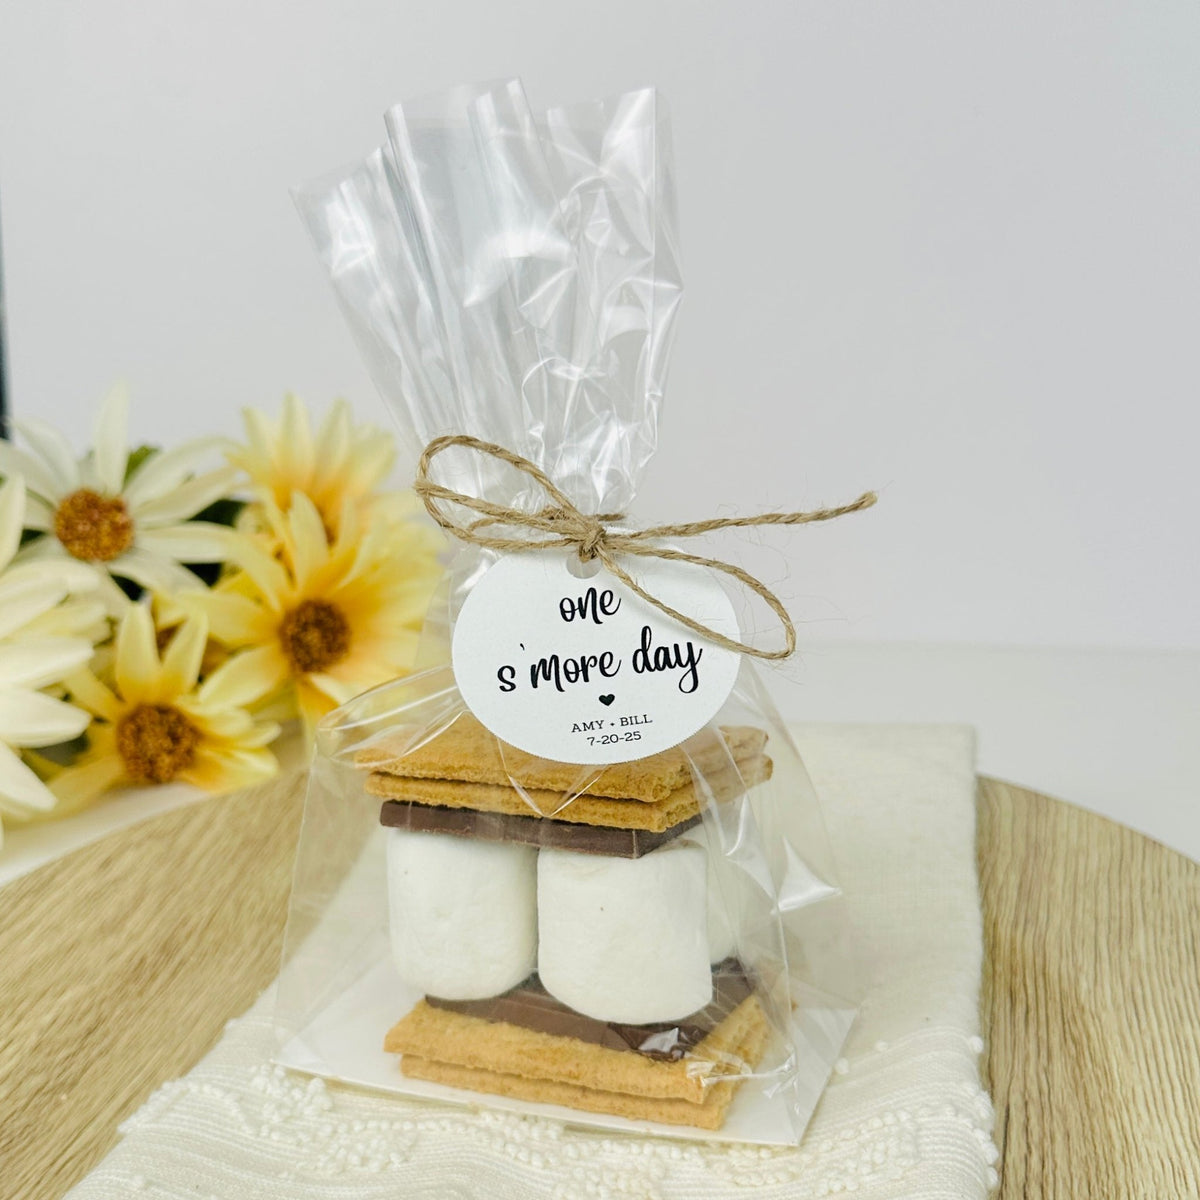 One S'more Day Rehearsal Favor - Forever Wedding Favors